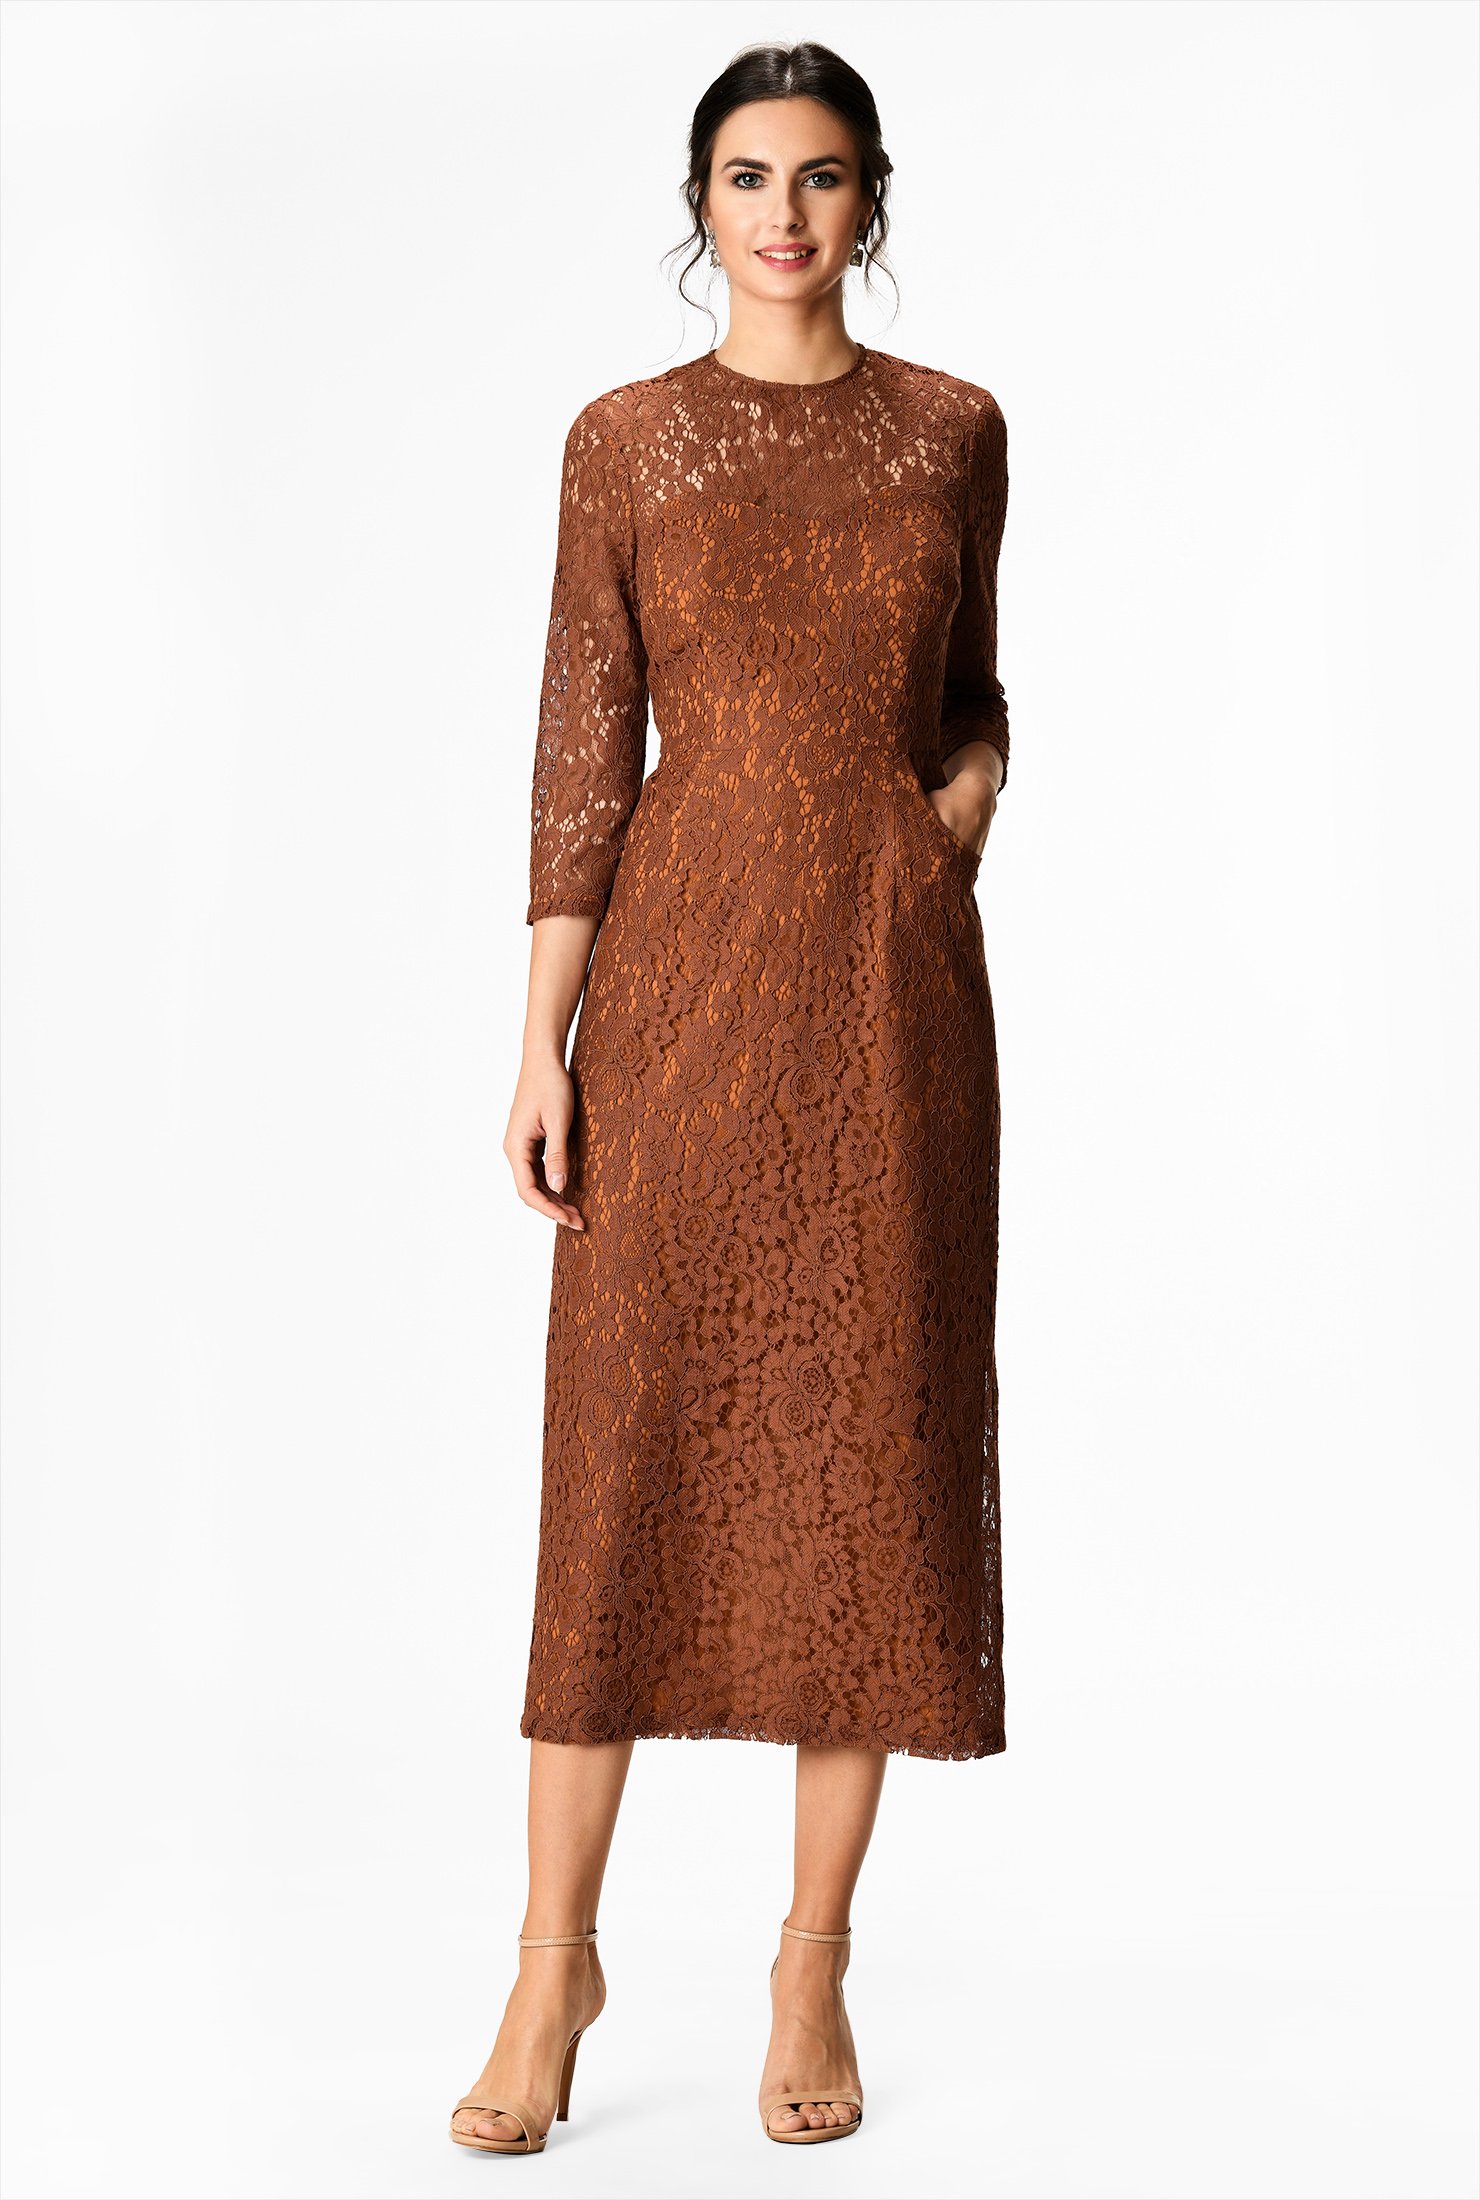 An illusion yoke tops our special event sheath dress of embellished floral lace that's feminine and classic with functional pockets at the slim skirt.